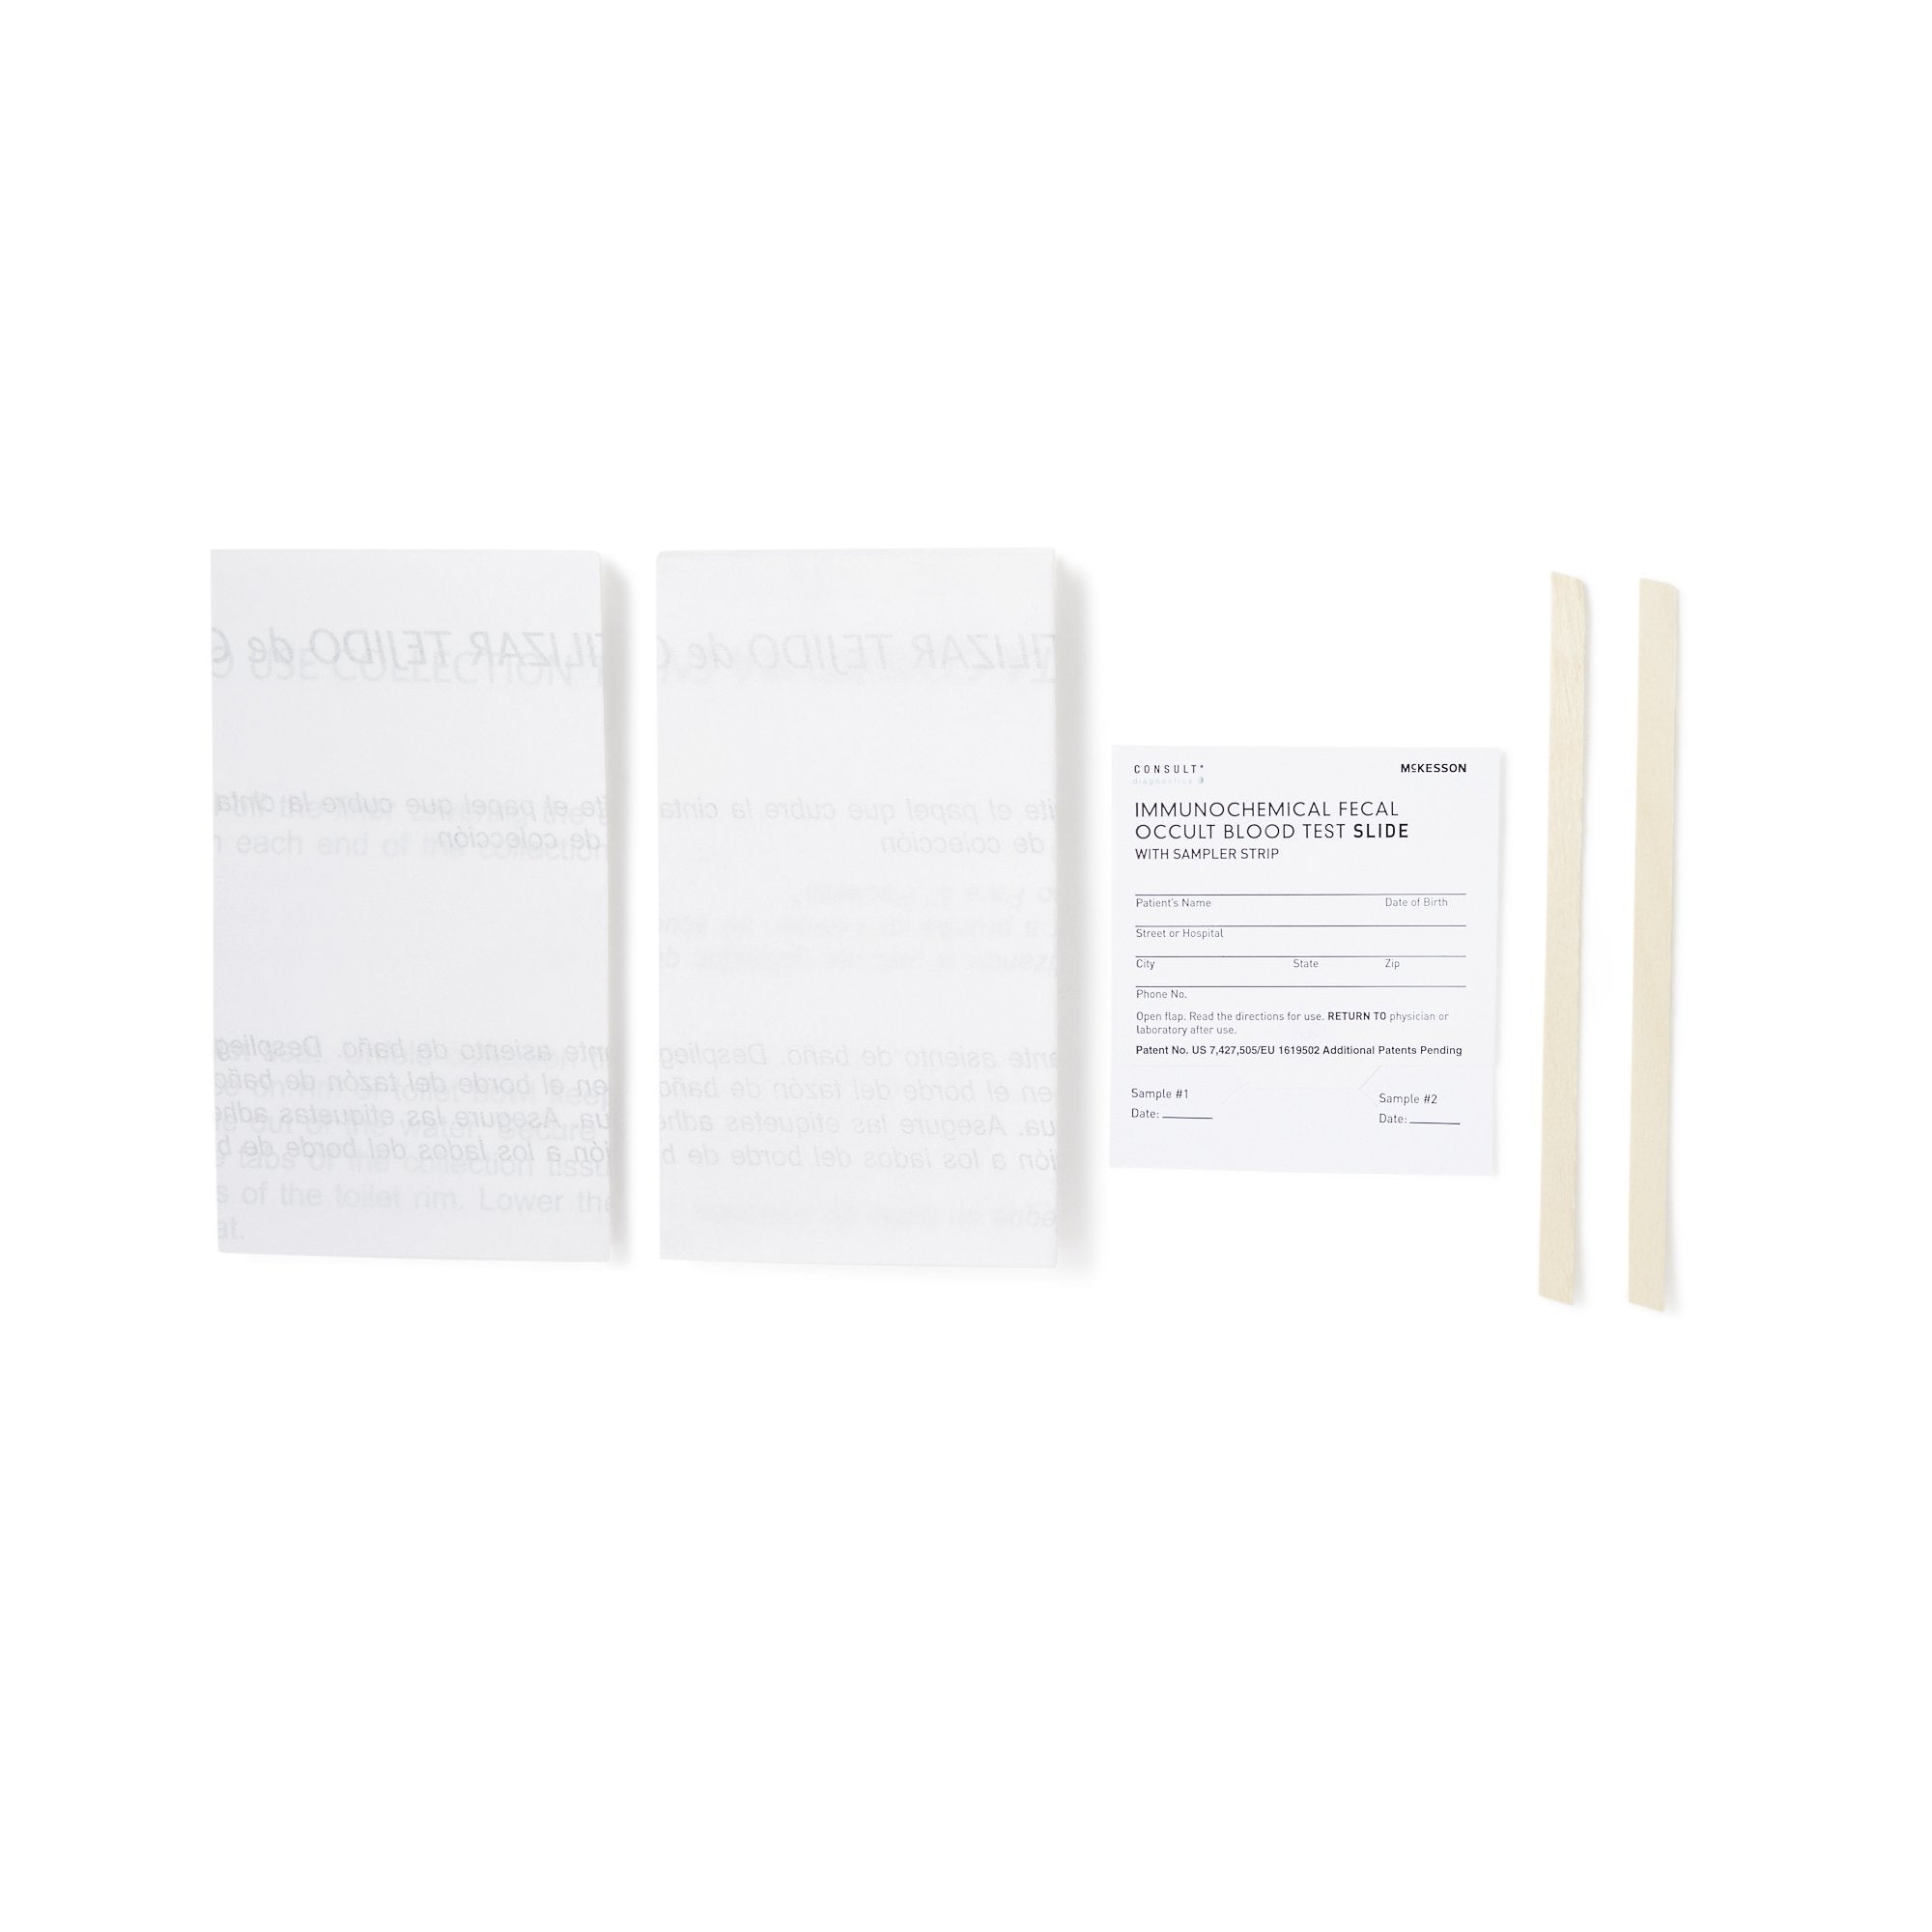 Stool Collection Kit Consult Mailing Envelopes Containing 1 Sampler Slide, 2 Collection Tissues, 2 Applicator Sticks, and 1 Patient Instructions Consult iFOBT Tests MFR #'s 4485, 4486, and 4487